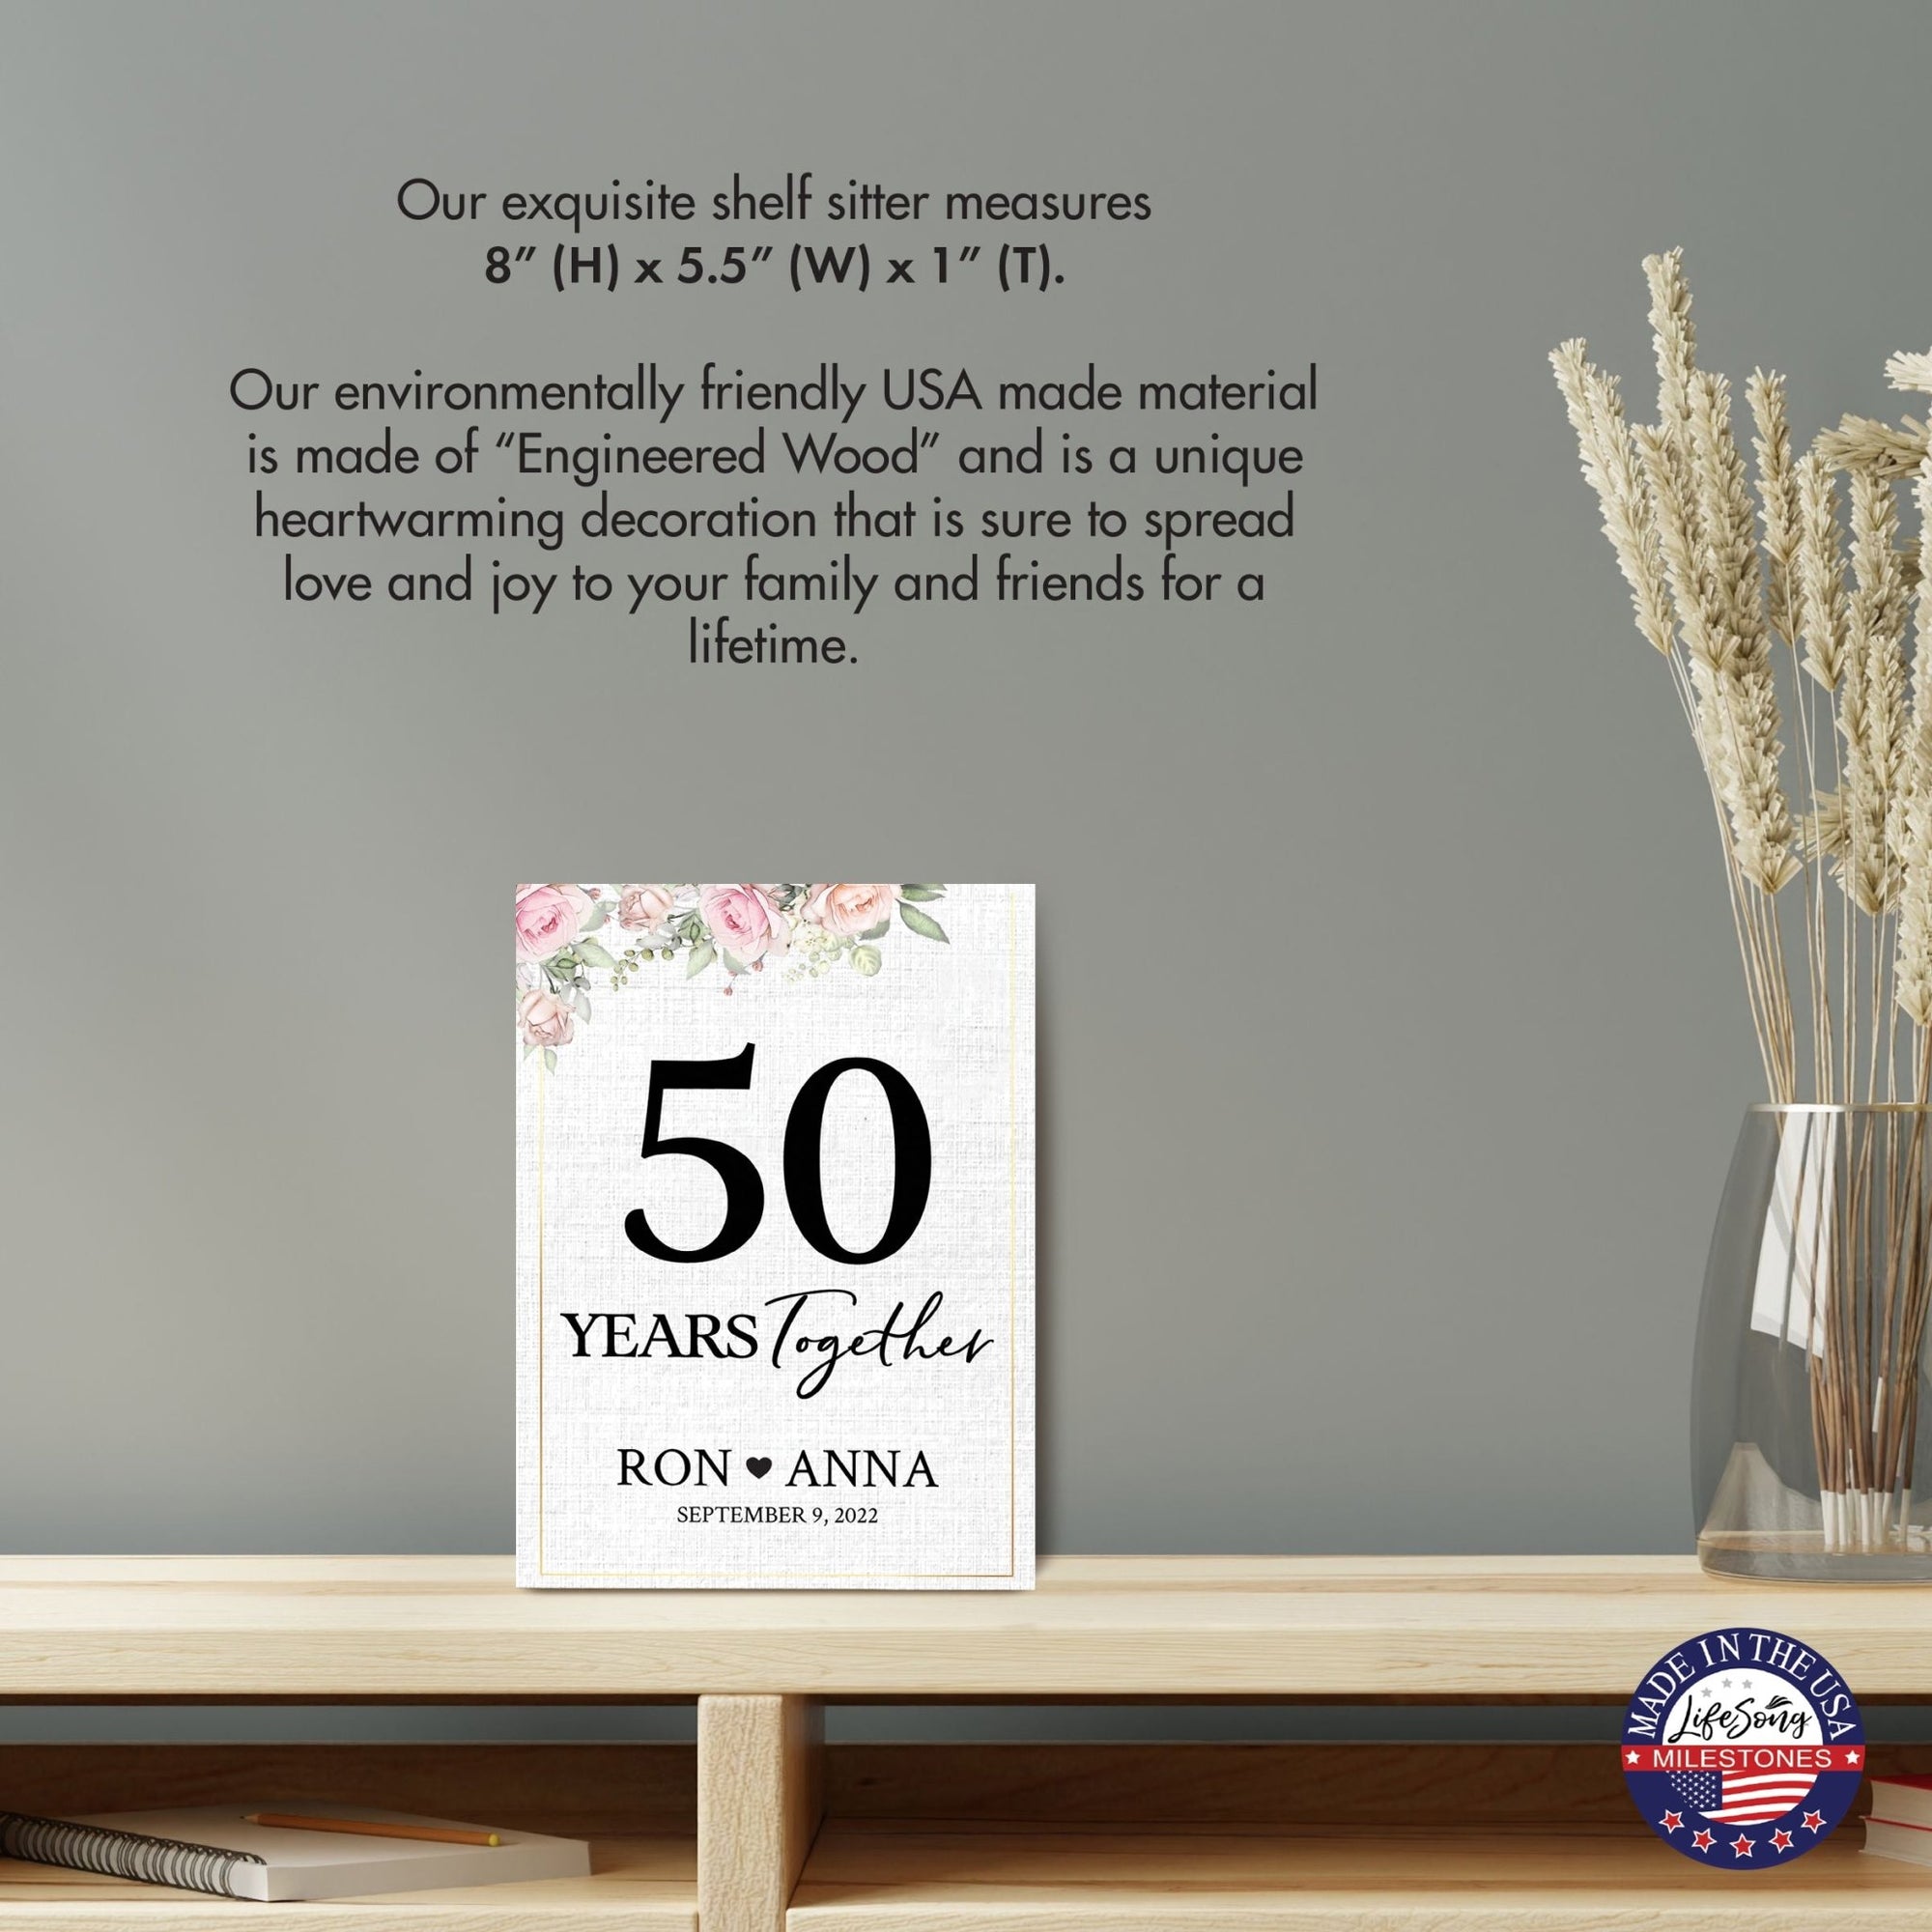 Personalized Unique Shelf Décor and Tabletop Signs Gifts for 50th Wedding Anniversary - LifeSong Milestones